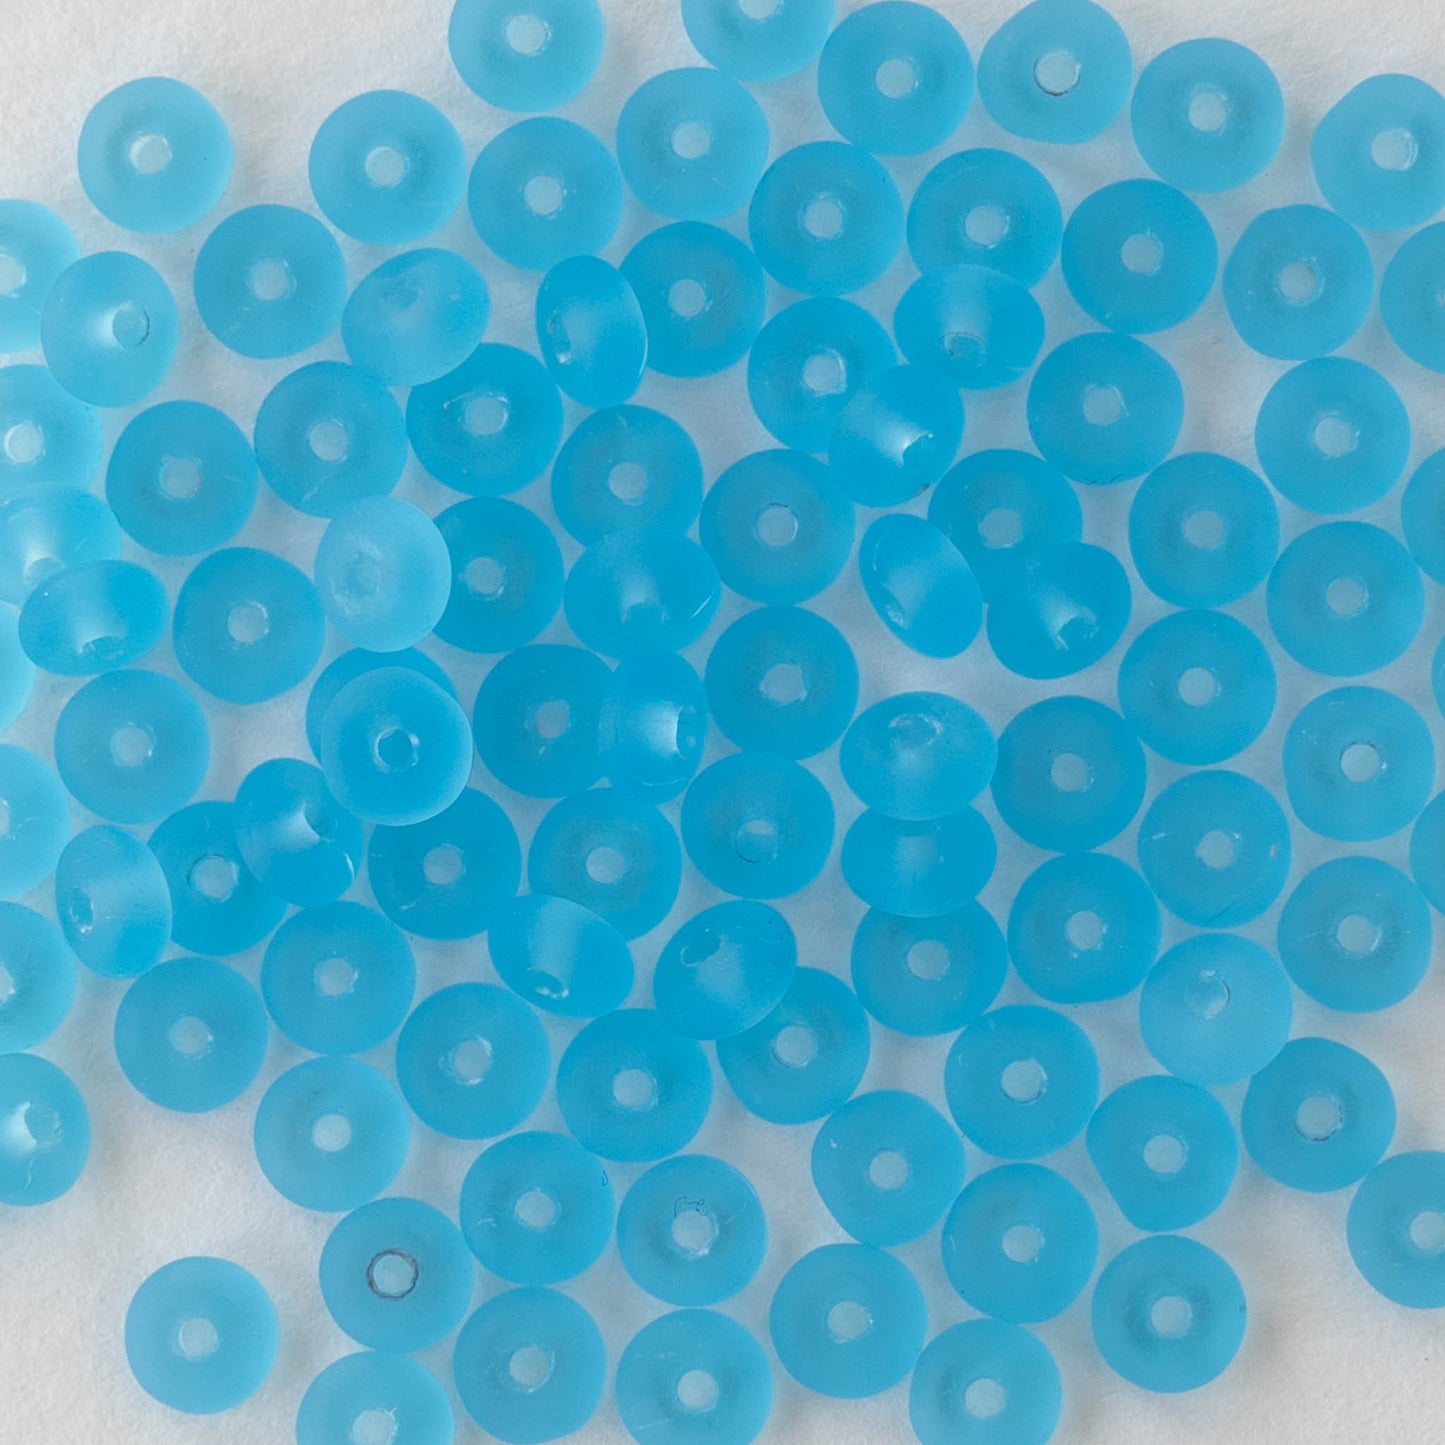 Load image into Gallery viewer, 4mm Rondelle Beads - Aqua Blue - 100 Beads
